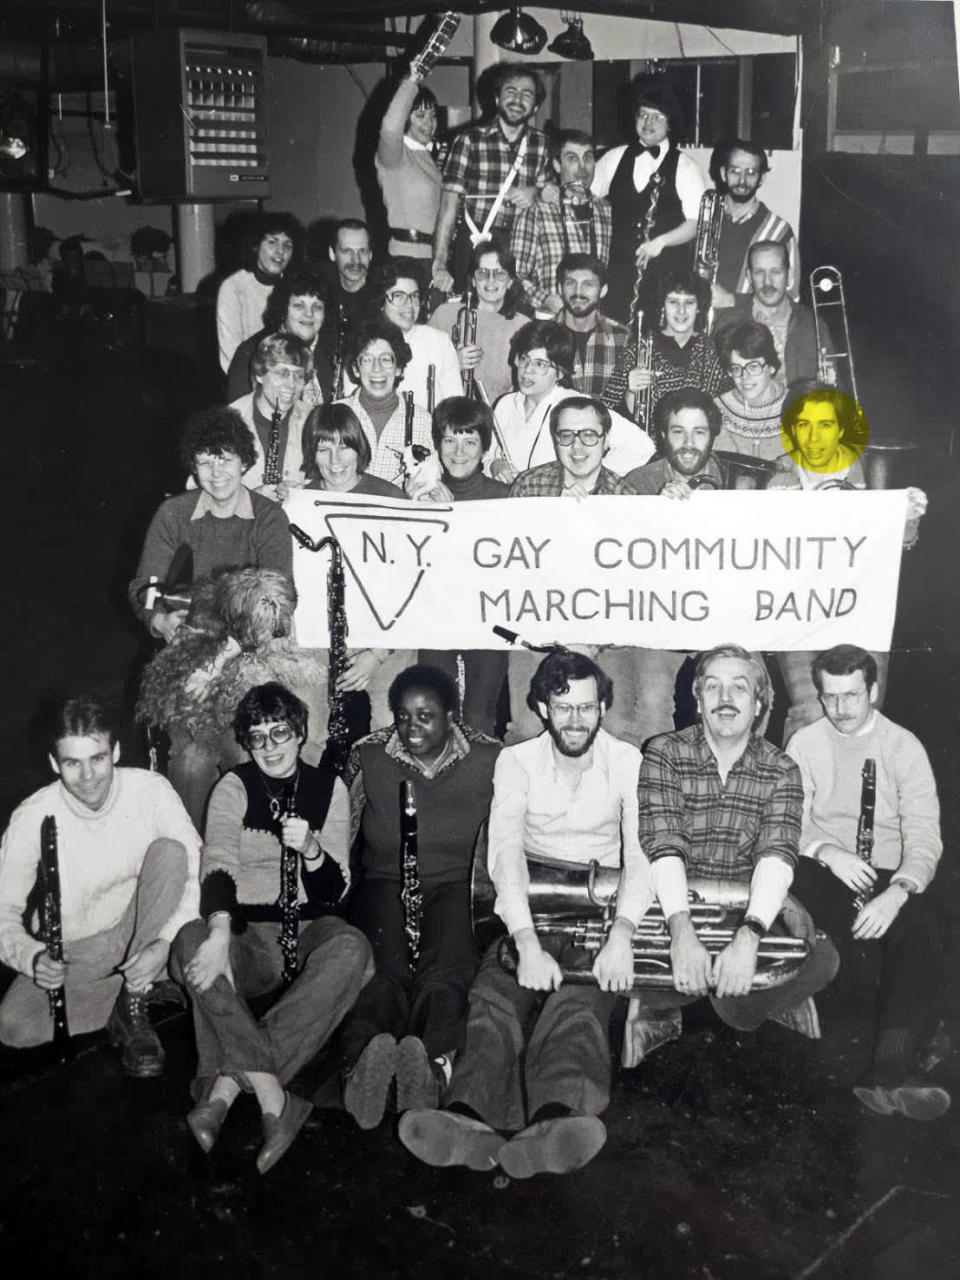 <div class="inline-image__caption"><p>Eric Rouda, highlighted, in a vintage photograph of the band.</p></div> <div class="inline-image__credit">Courtesy Roberta F. Raeburn</div>